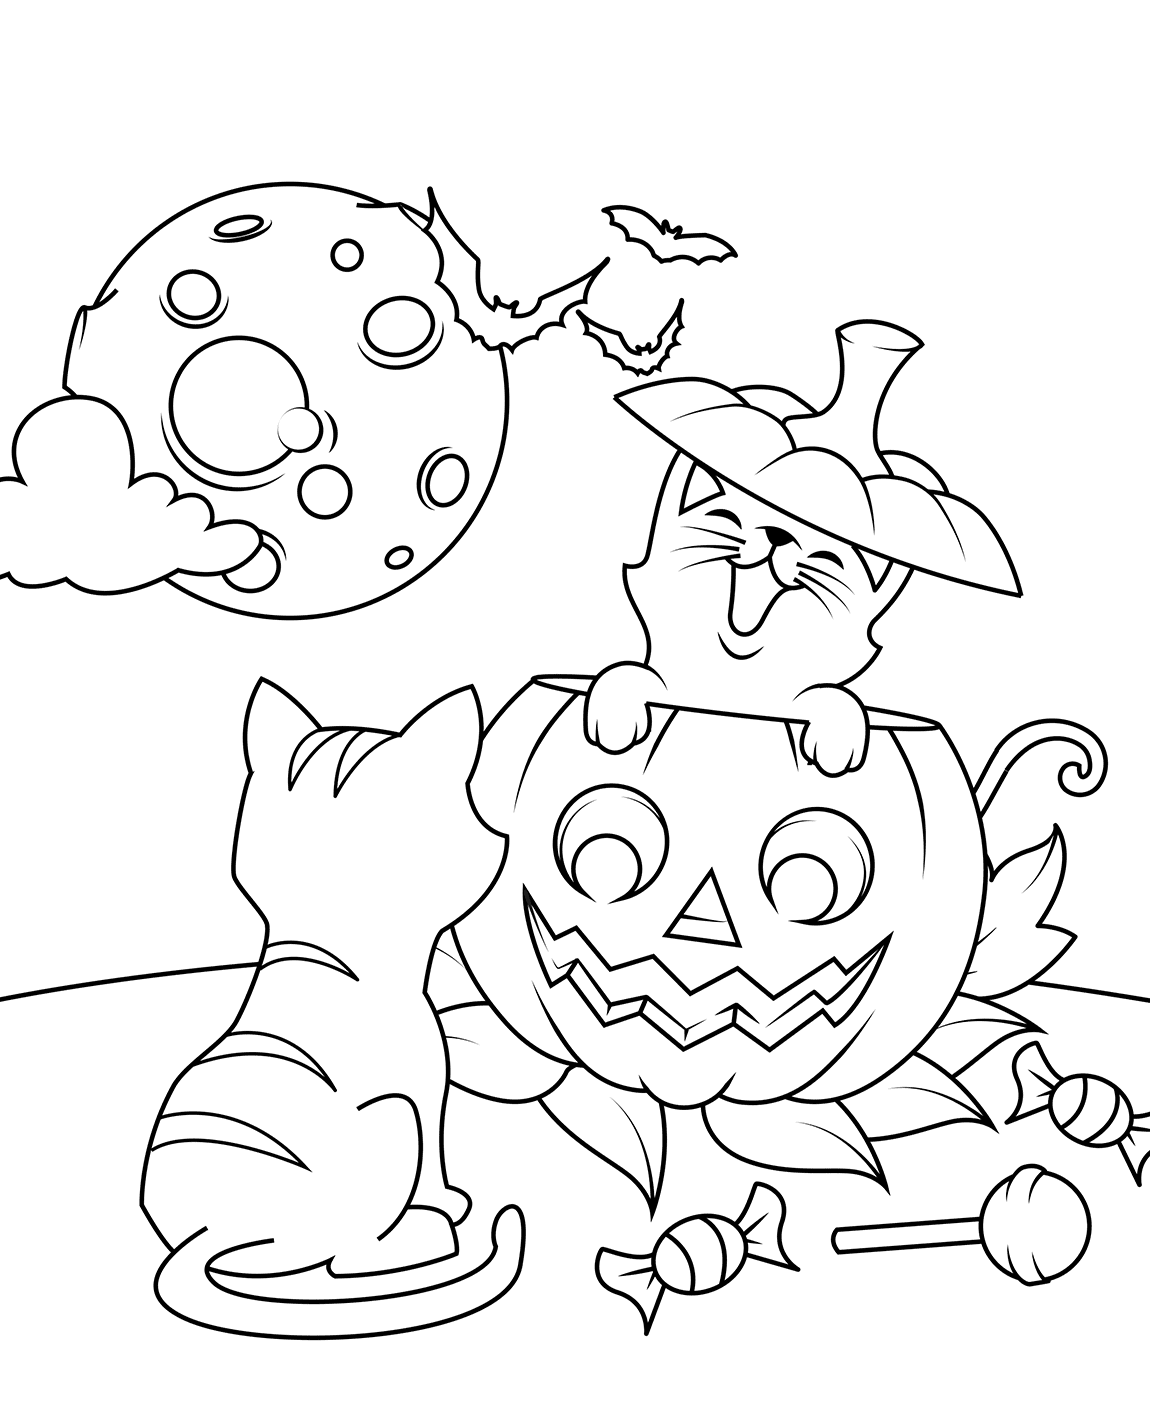 Cats And Jack O Lantern Halloween Coloring Page